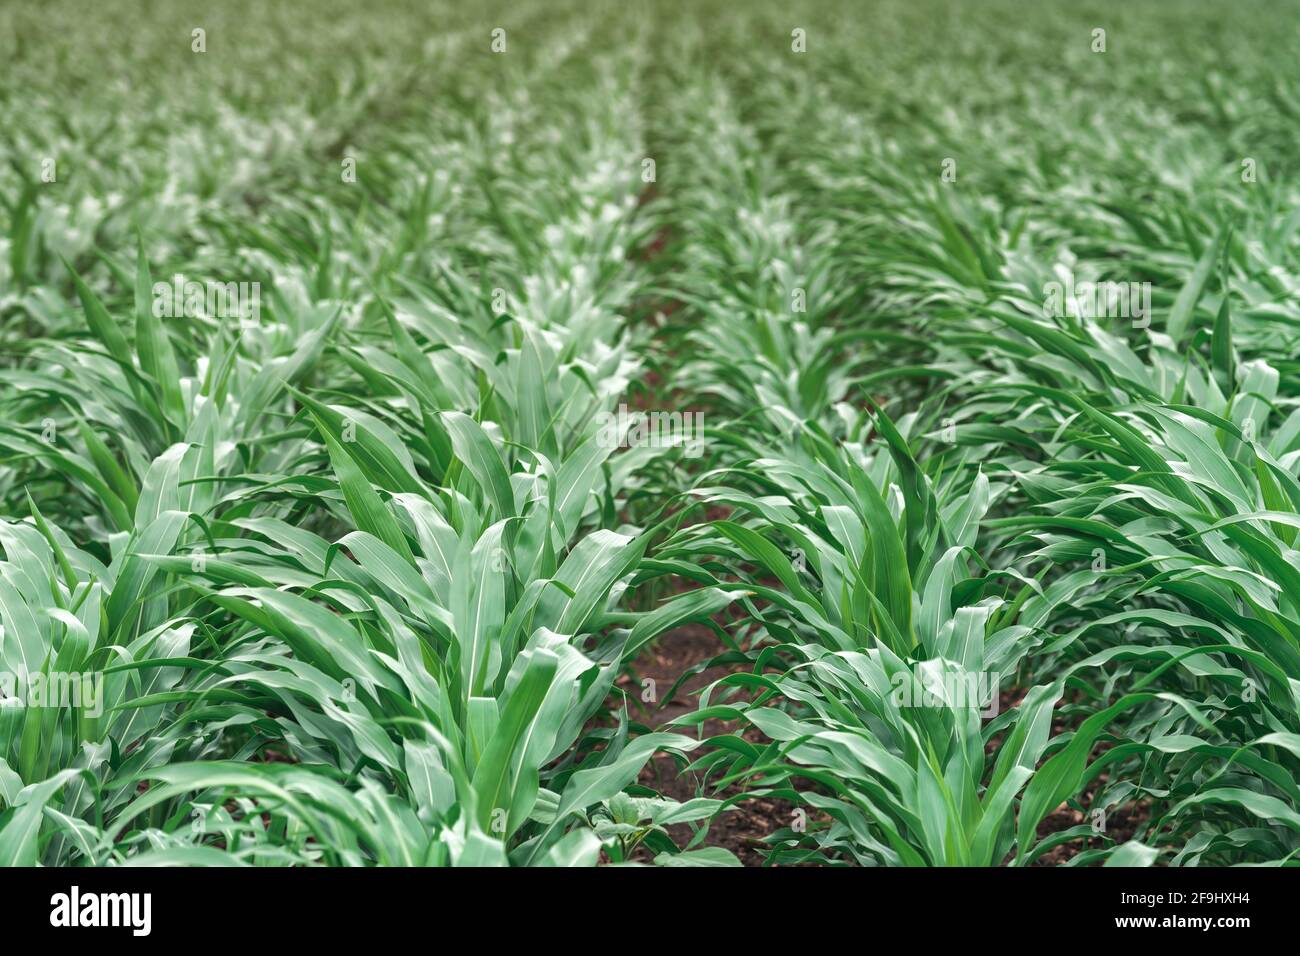 Corn field, selective focus. Green maize crops in diminishing perspective. Stock Photo